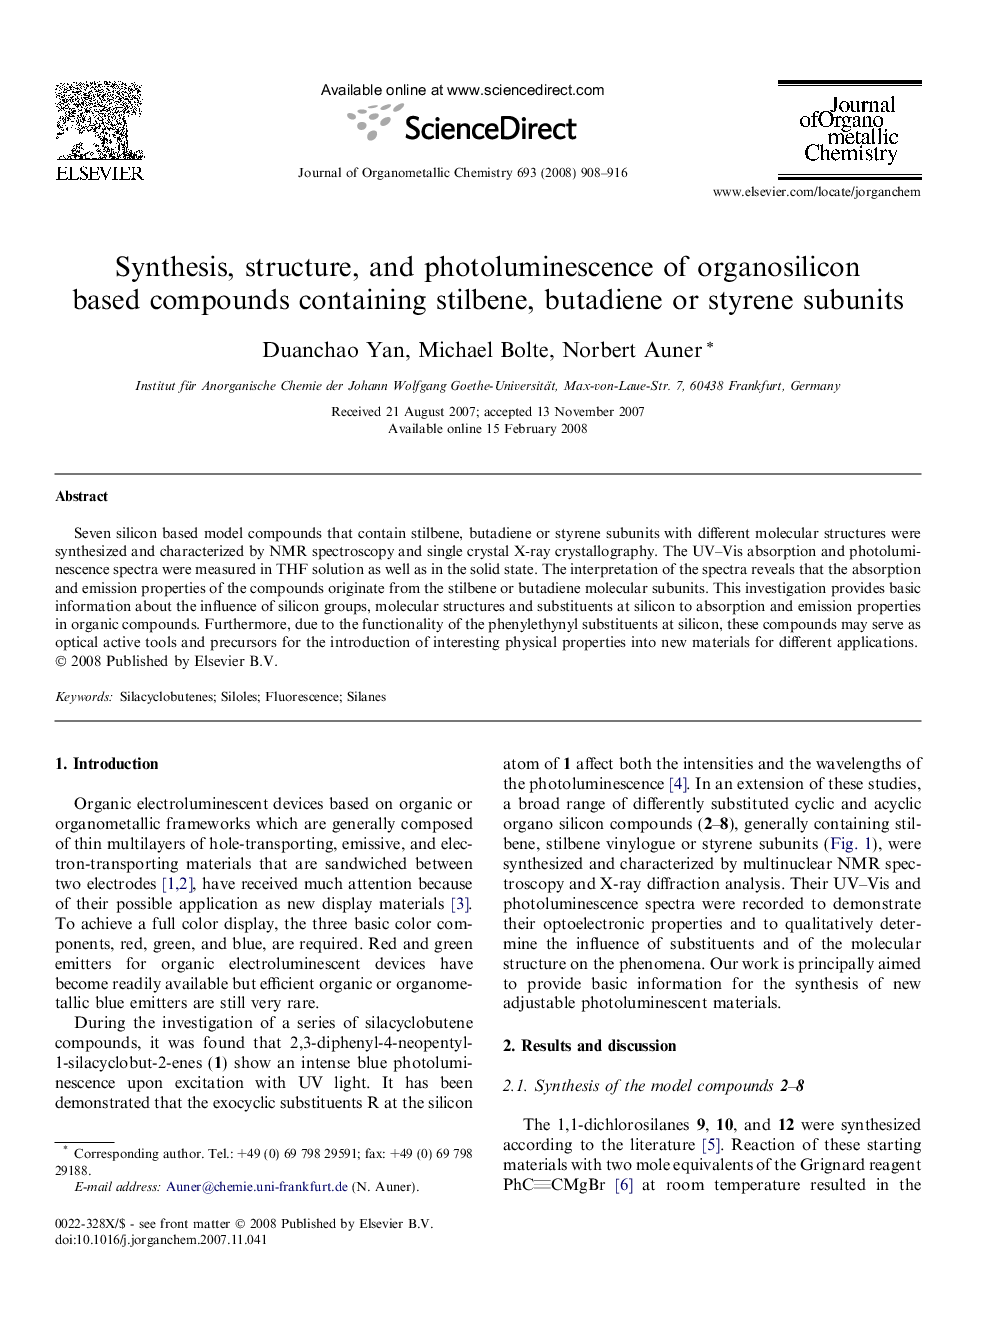 Synthesis, structure, and photoluminescence of organosilicon based compounds containing stilbene, butadiene or styrene subunits